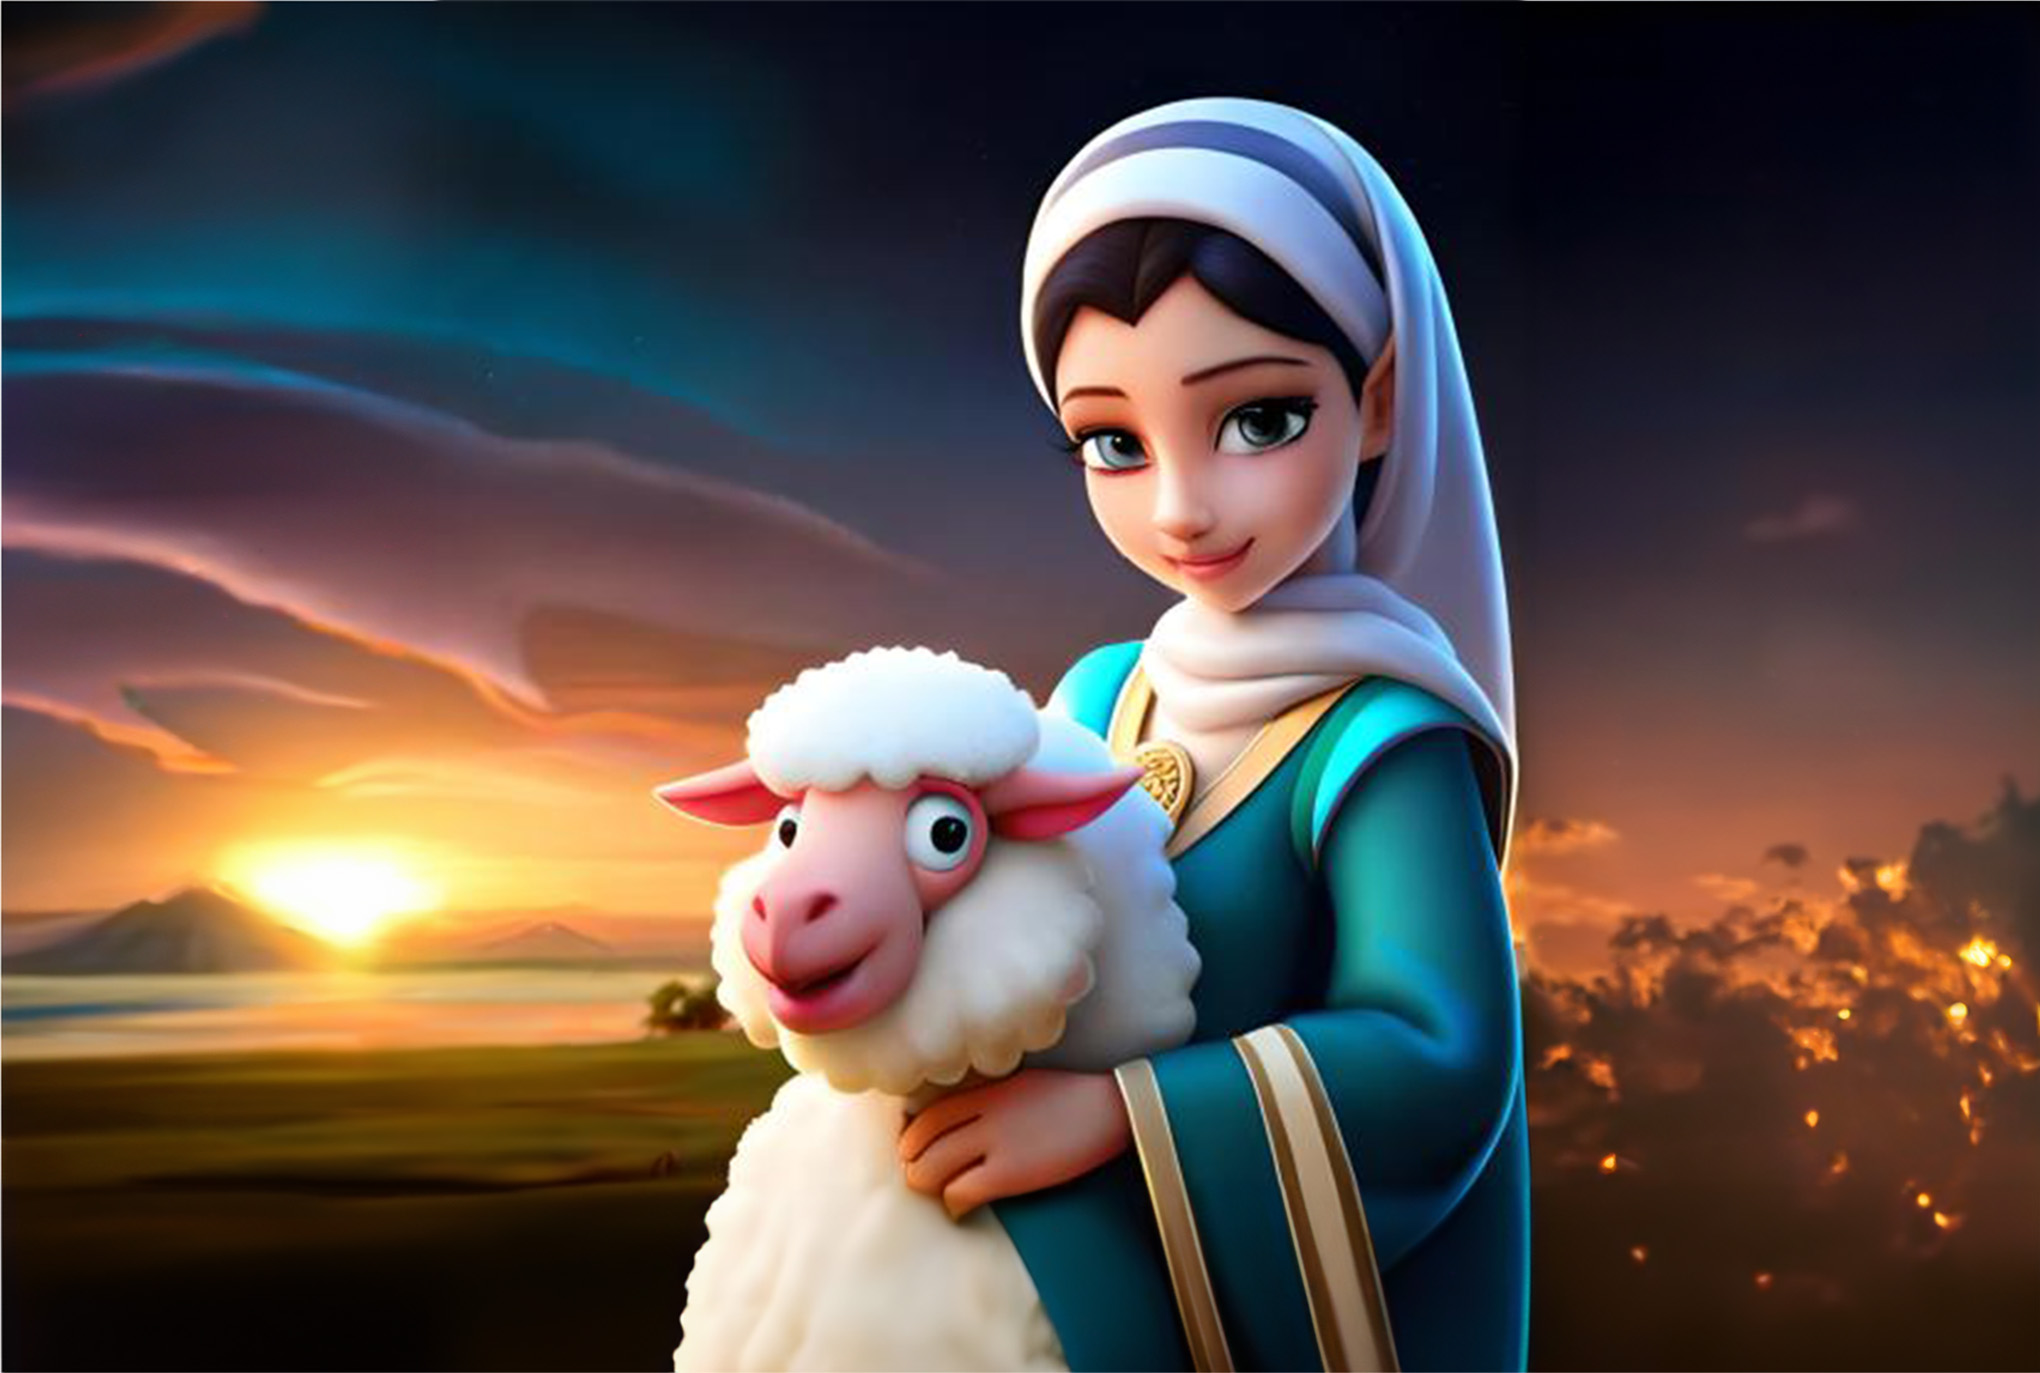 Beautiful Muslim Queen With Goat Celebrating Eid al Adha Iamge Download For Free